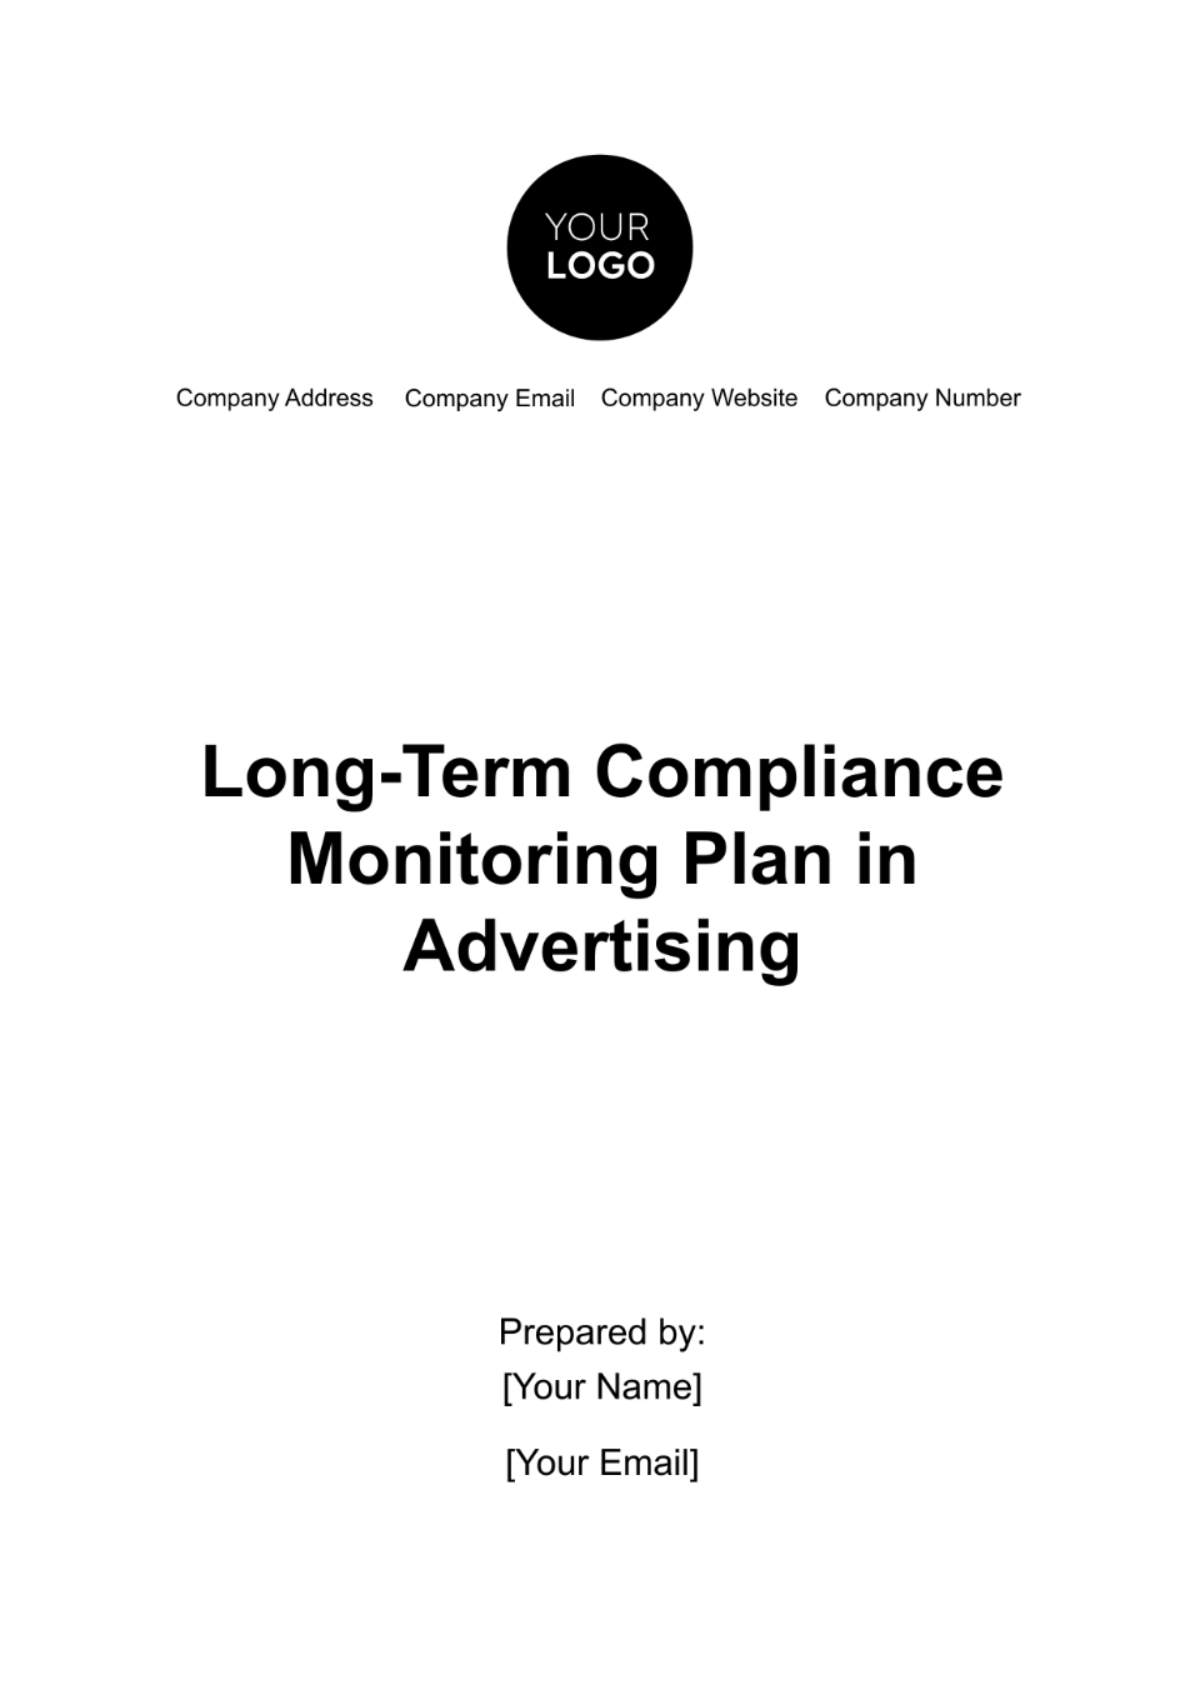 Free Long-Term Compliance Monitoring Plan in Advertising Template